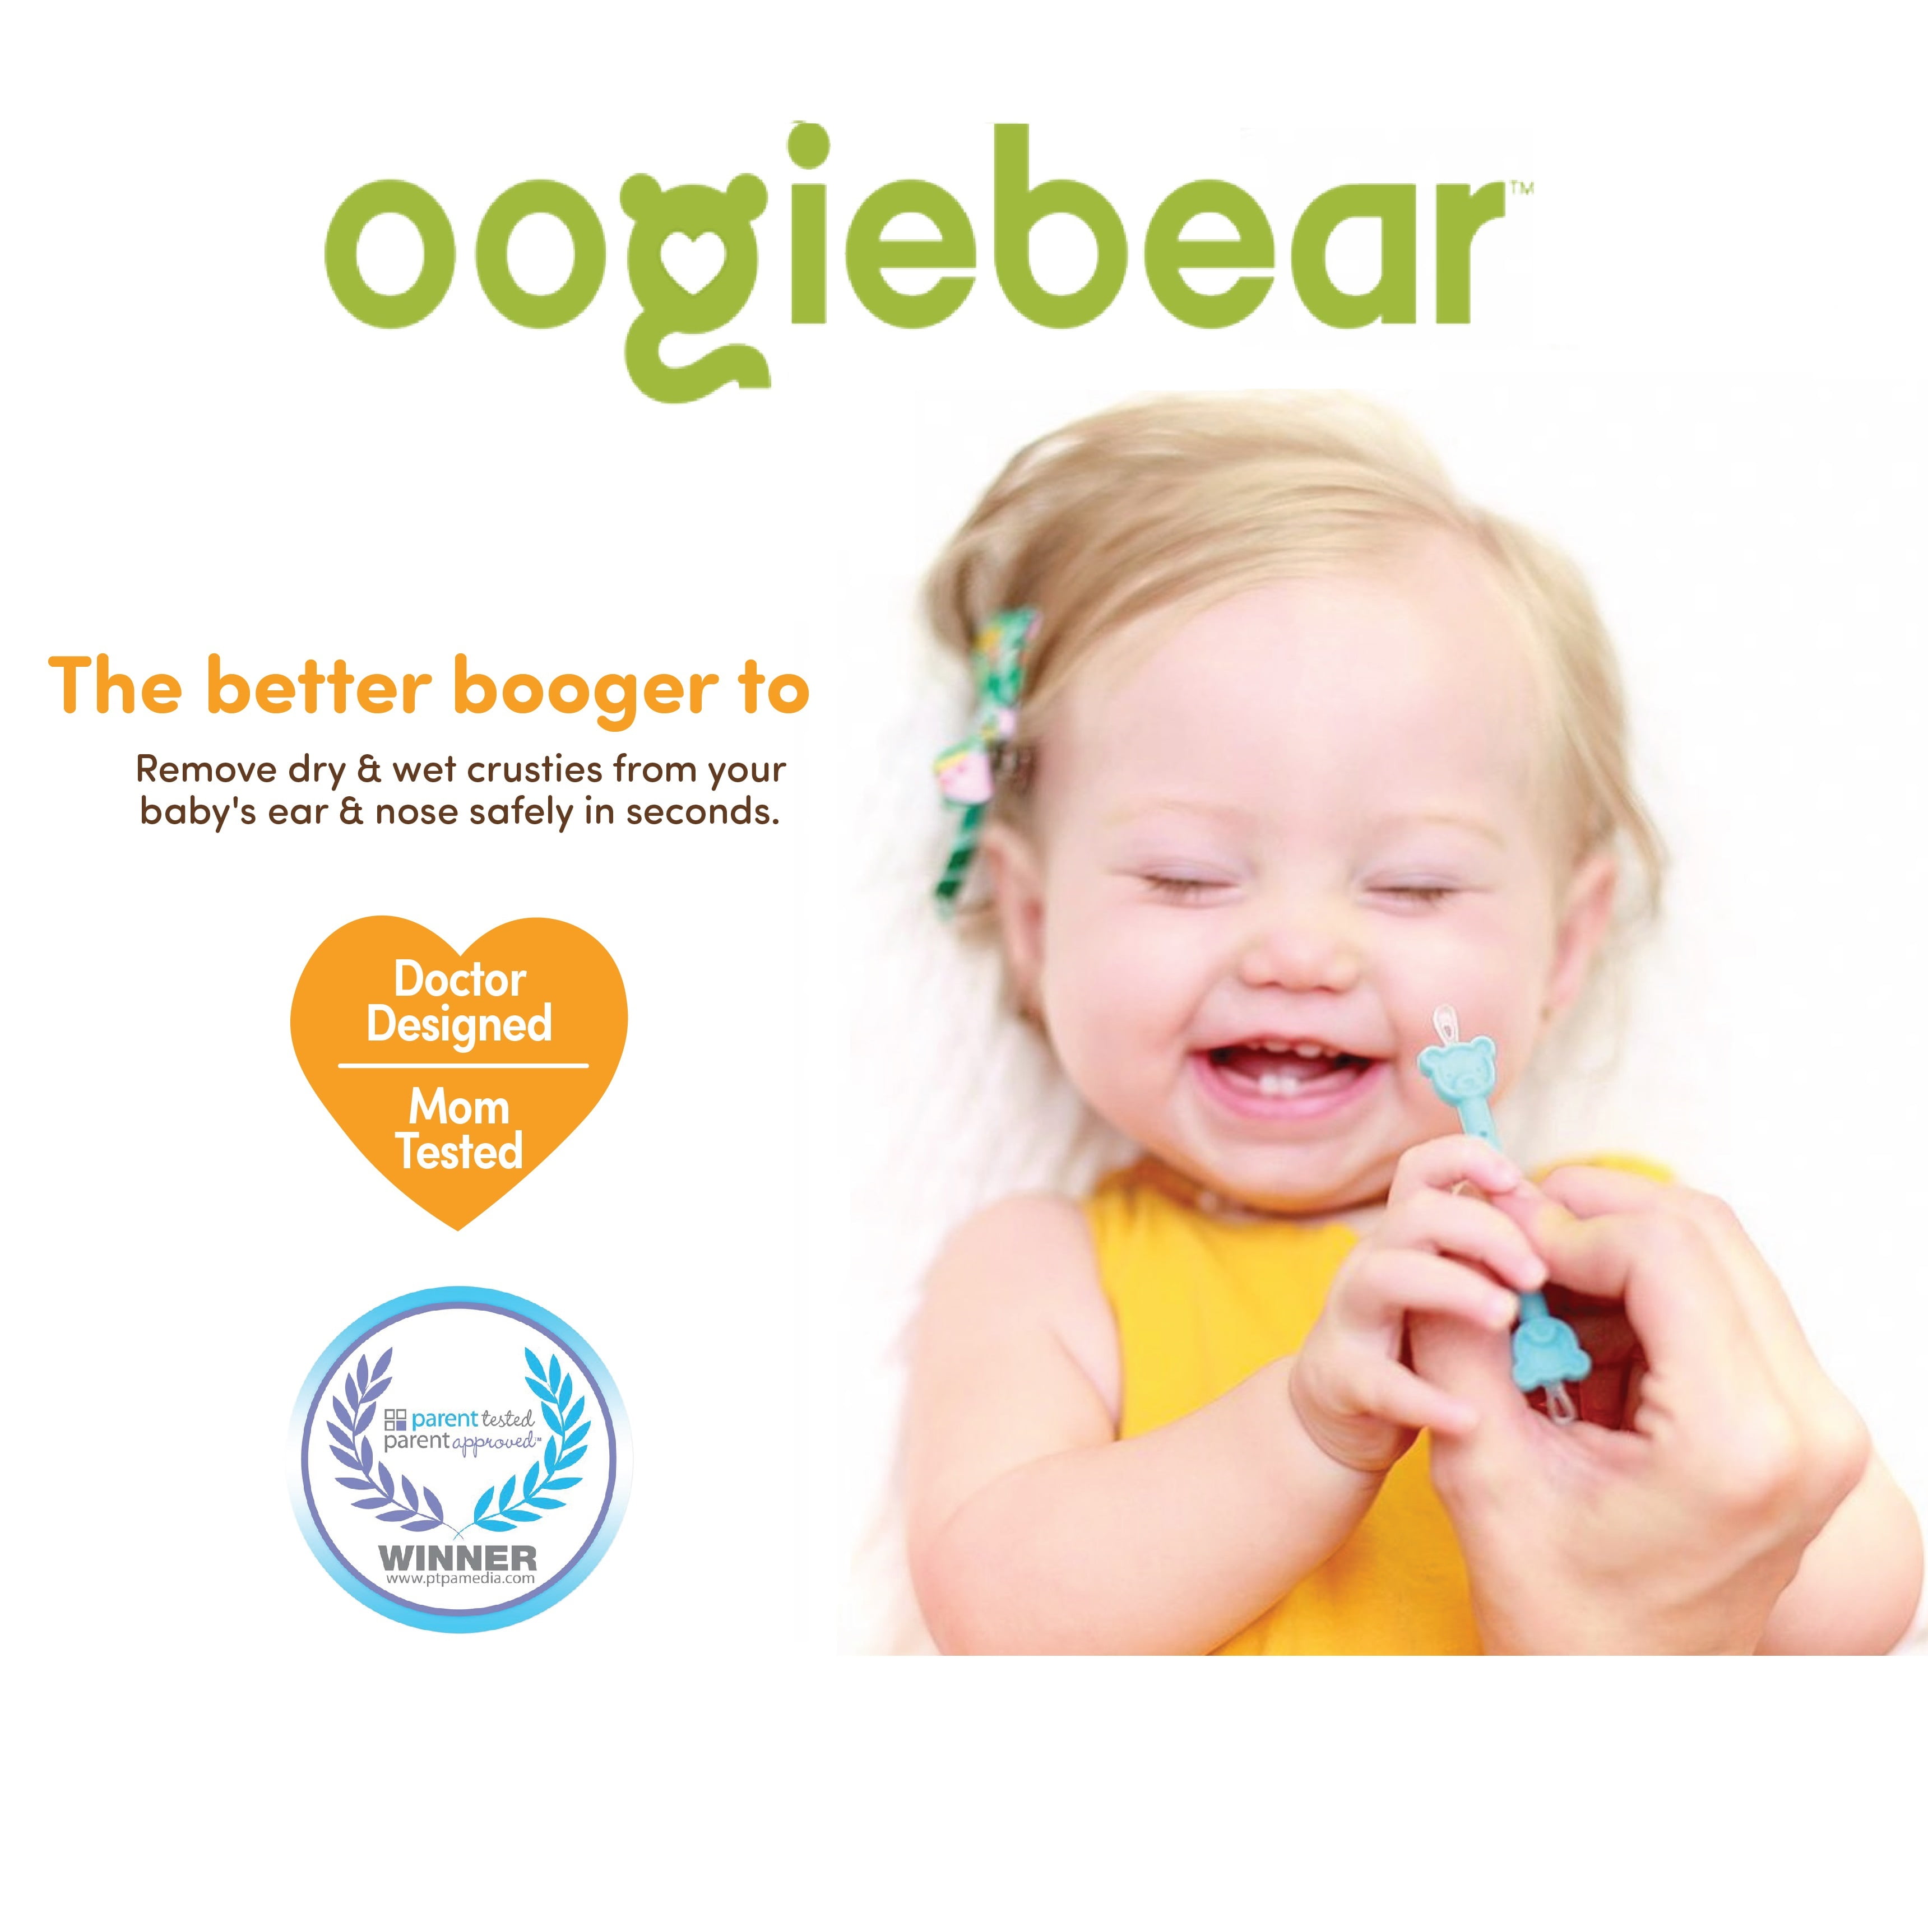 Wholesale oogiebear® Nasal Booger and Ear Wax Remover for babies